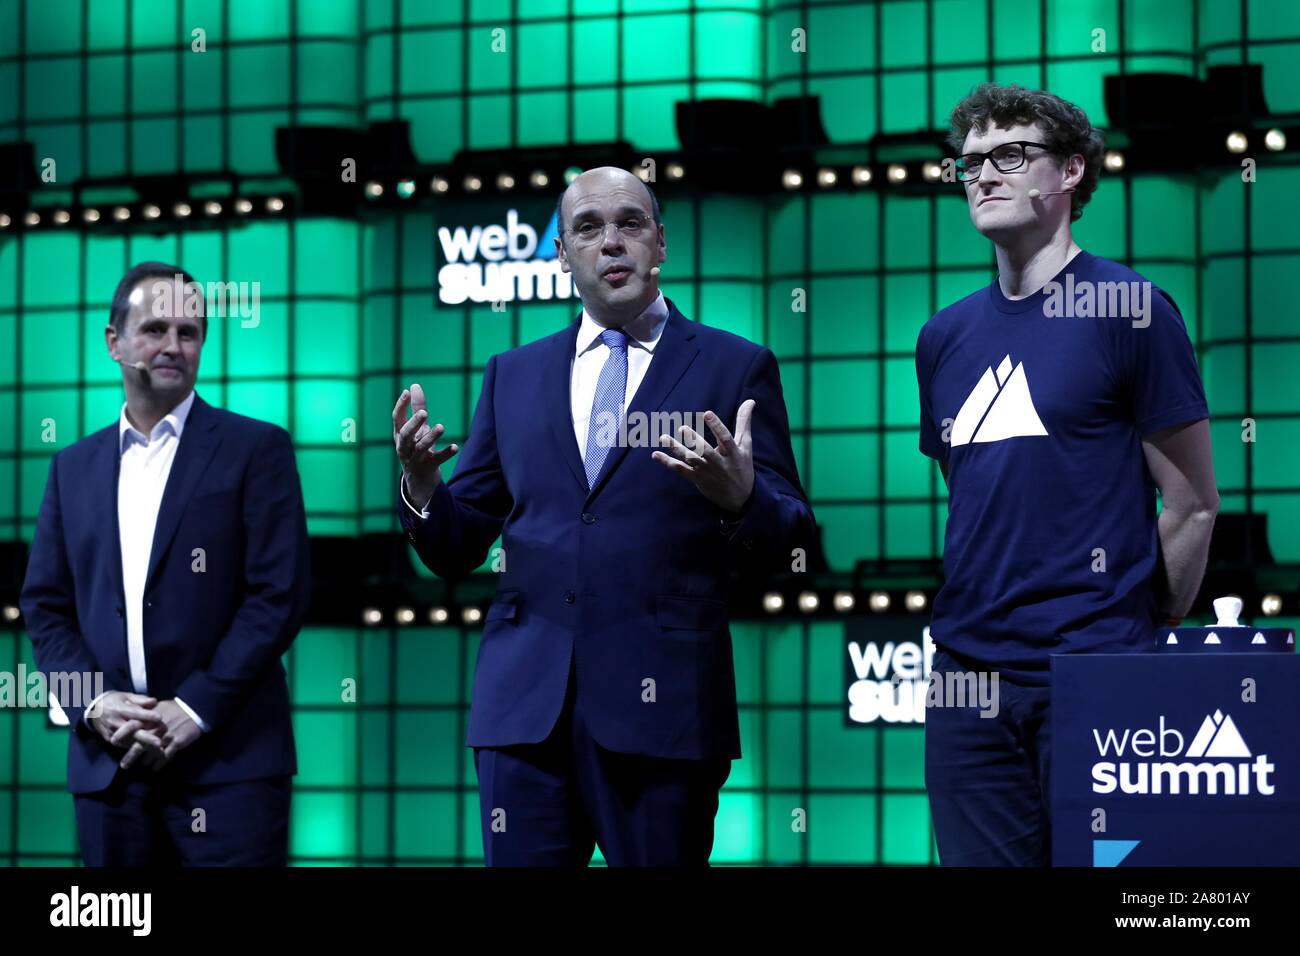 (191105) -- LISBON, Nov. 5, 2019 (Xinhua) -- Portuguese minister of economy and digital transition Pedro Siza Vieira (C) delivers a speech as Mayor of Lisbon Fernando Medina (1st L) and CEO of Web Summit Paddy Cosgrave (1st R) look on during the opening ceremony of the Web Summit in Lisbon, Portugal, Nov. 4, 2019. The Web Summit 2019 will be held in Lisbon from Nov. 4 to 7, hitting a record high with over 70,000 participants from 163 countries and regions. Over 1,200 speakers will attend the Web Summit in Portugal and speak on the 22 stages throughout the event. Founded in 2009 in Ireland, Stock Photo